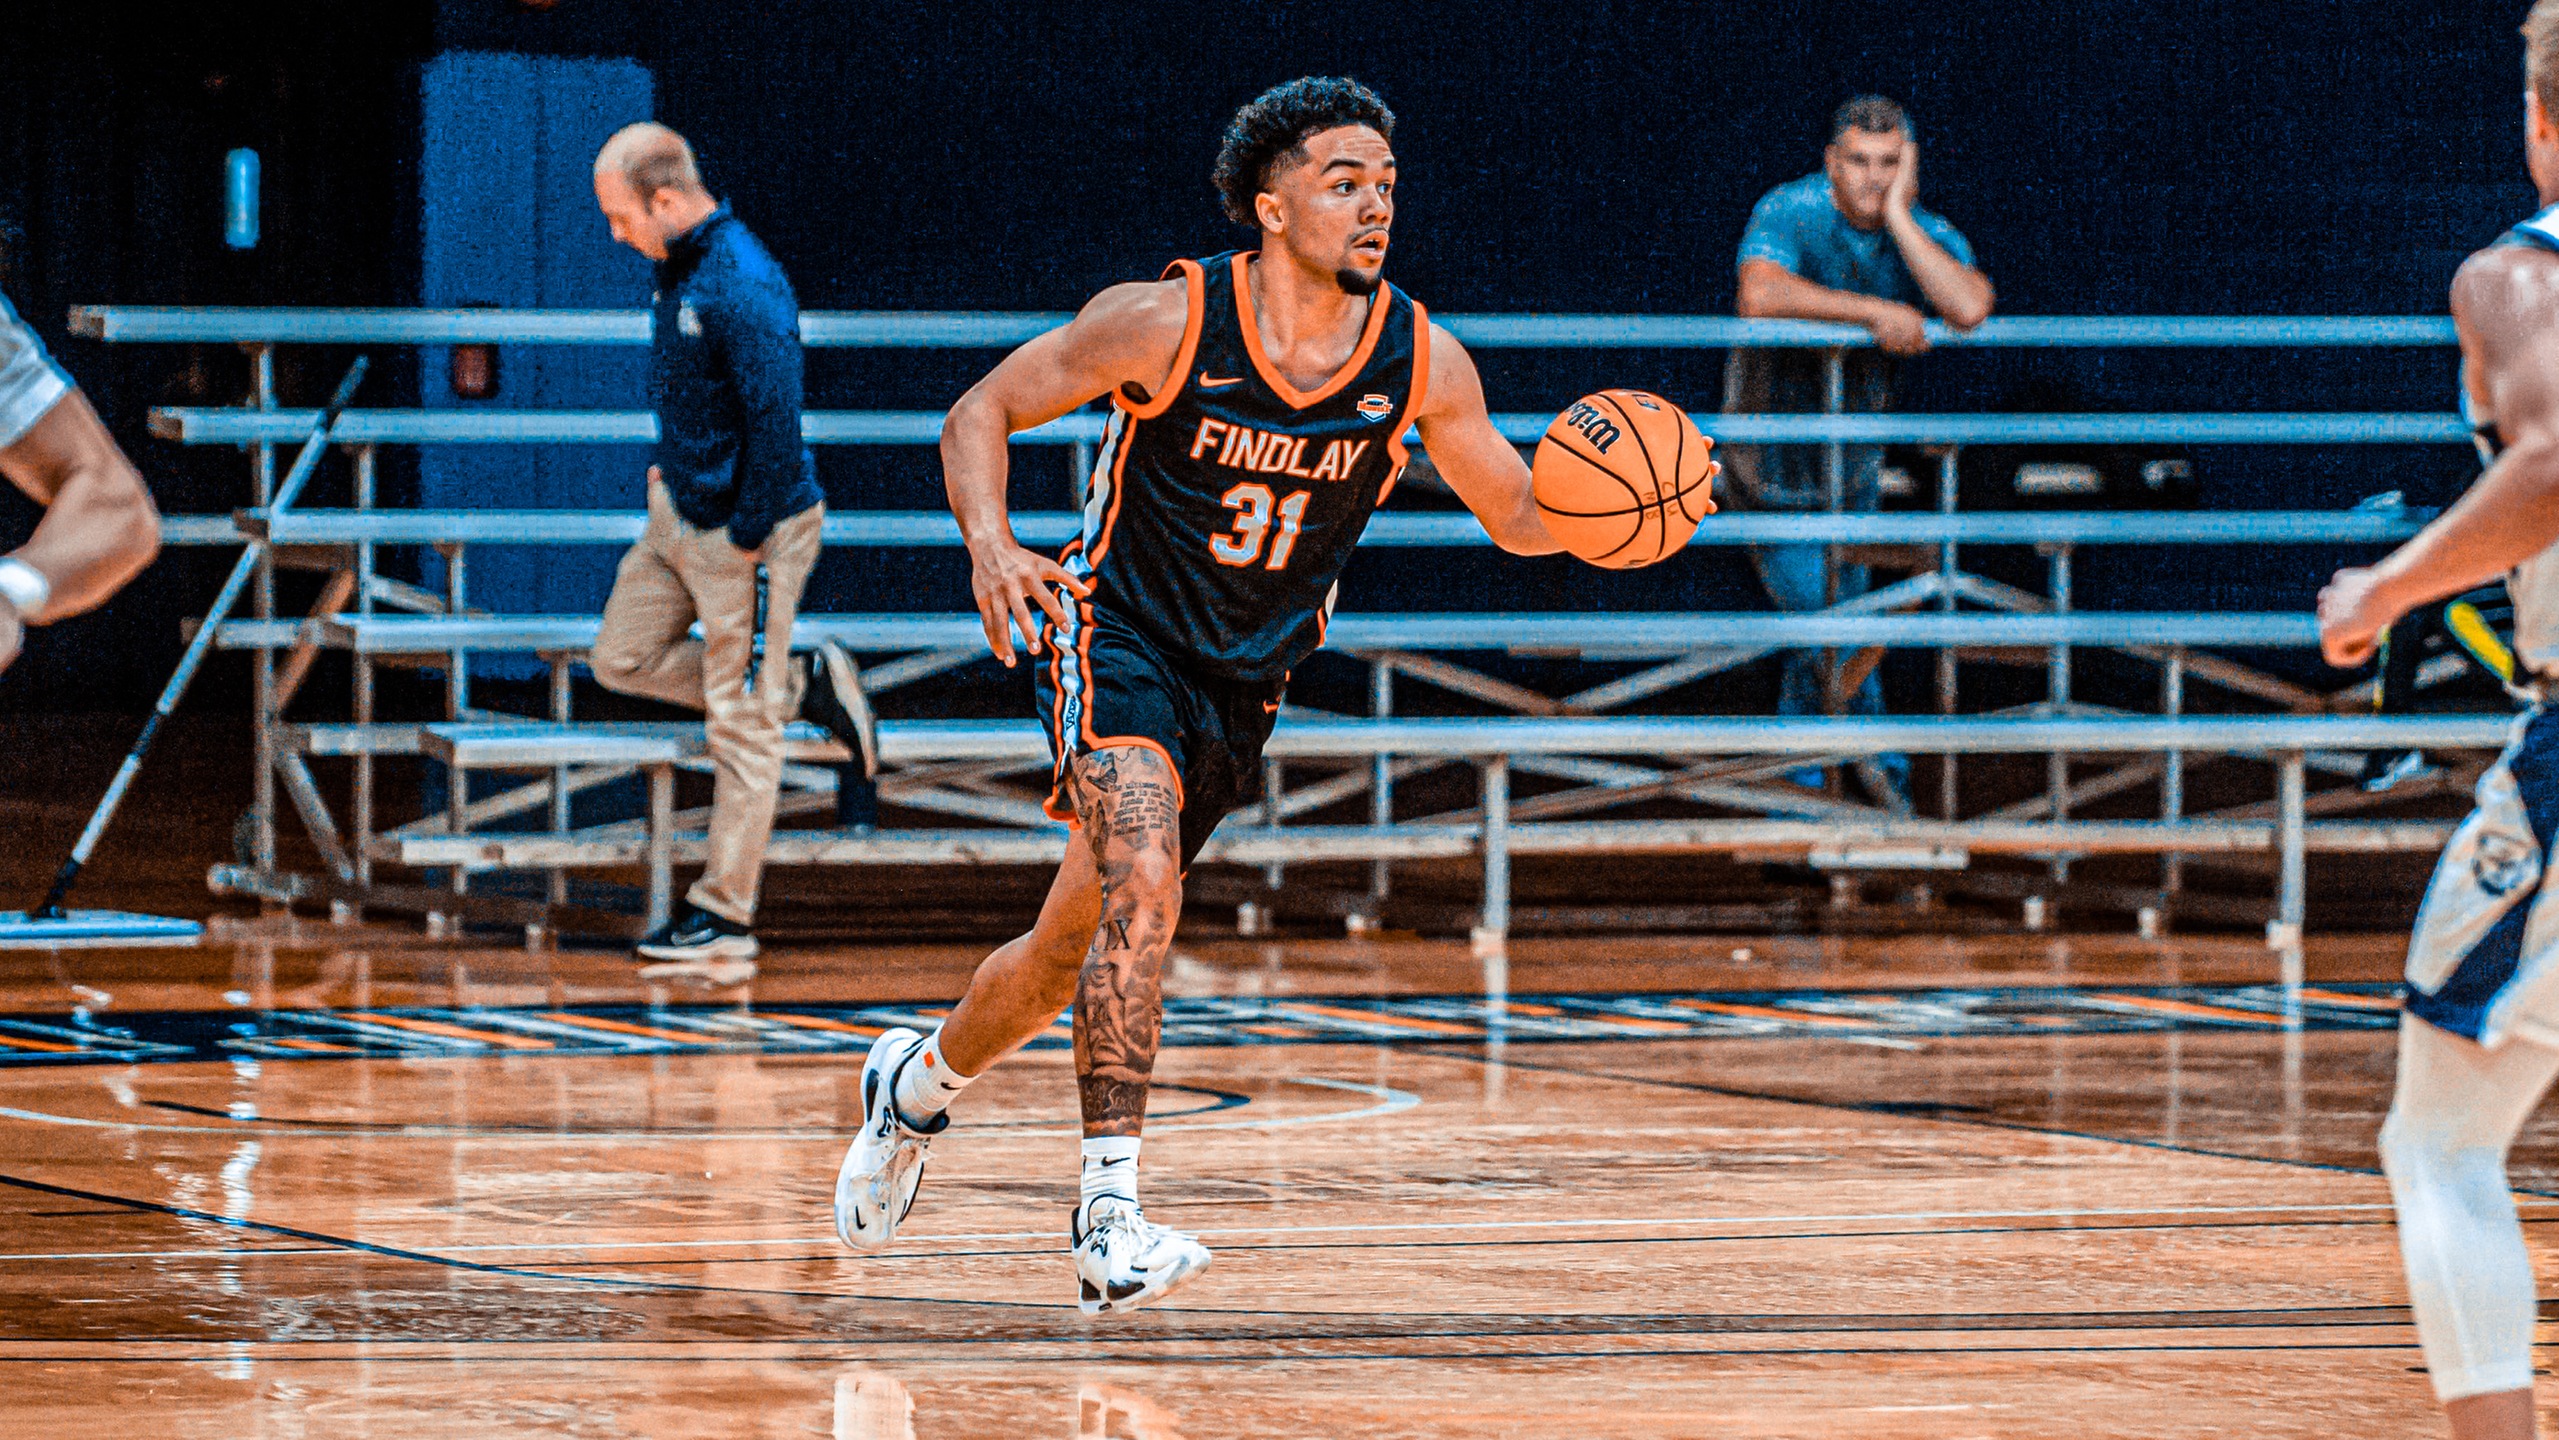 Oilers Fall to Hot Shooting #6 Hillsdale